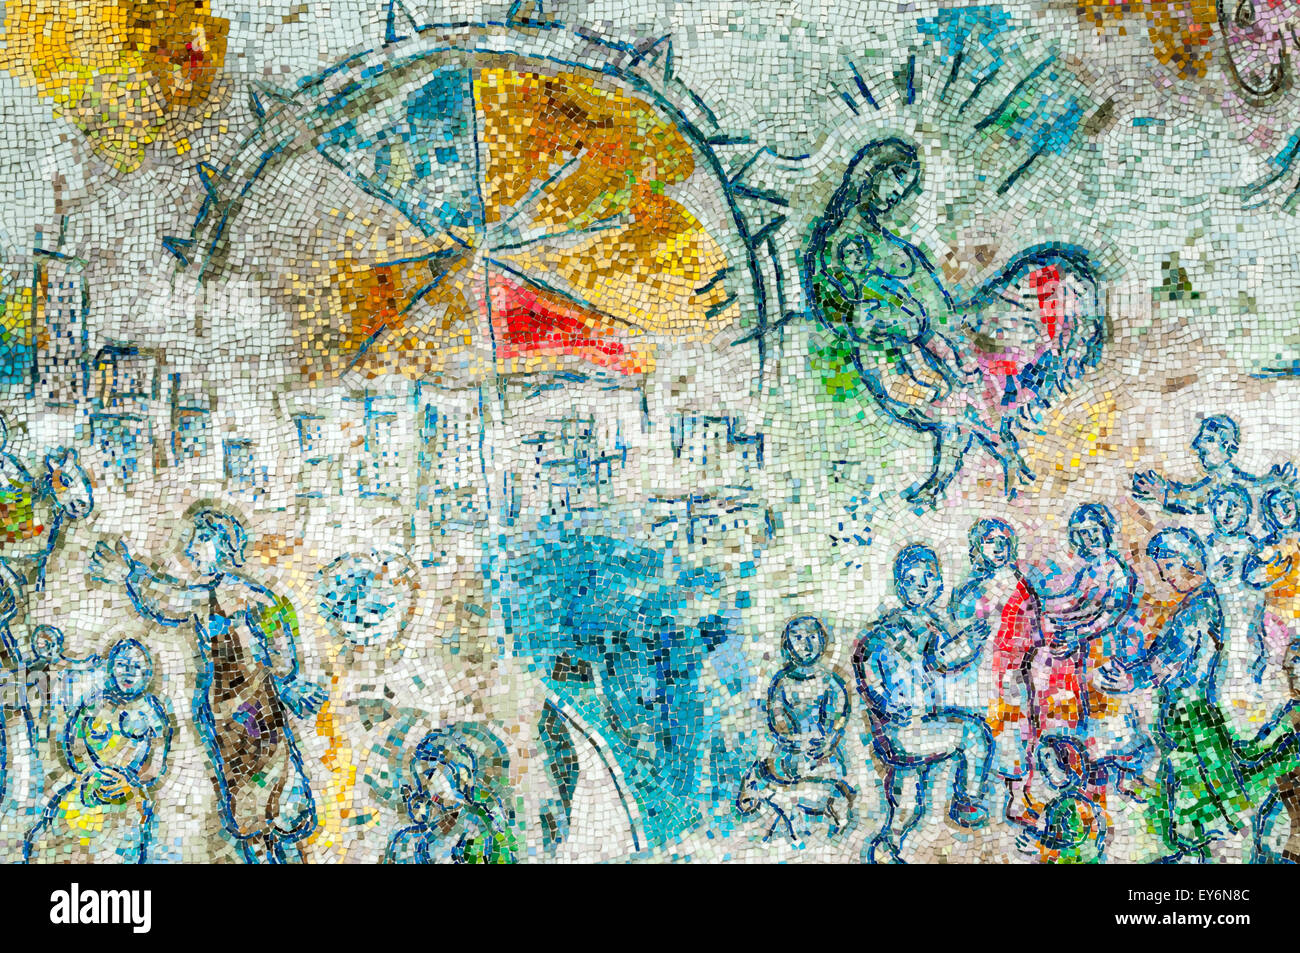 A detail of the Four Seasons mosaic by Marc Chagall in Chase Tower Plaza, Chicago. Stock Photo